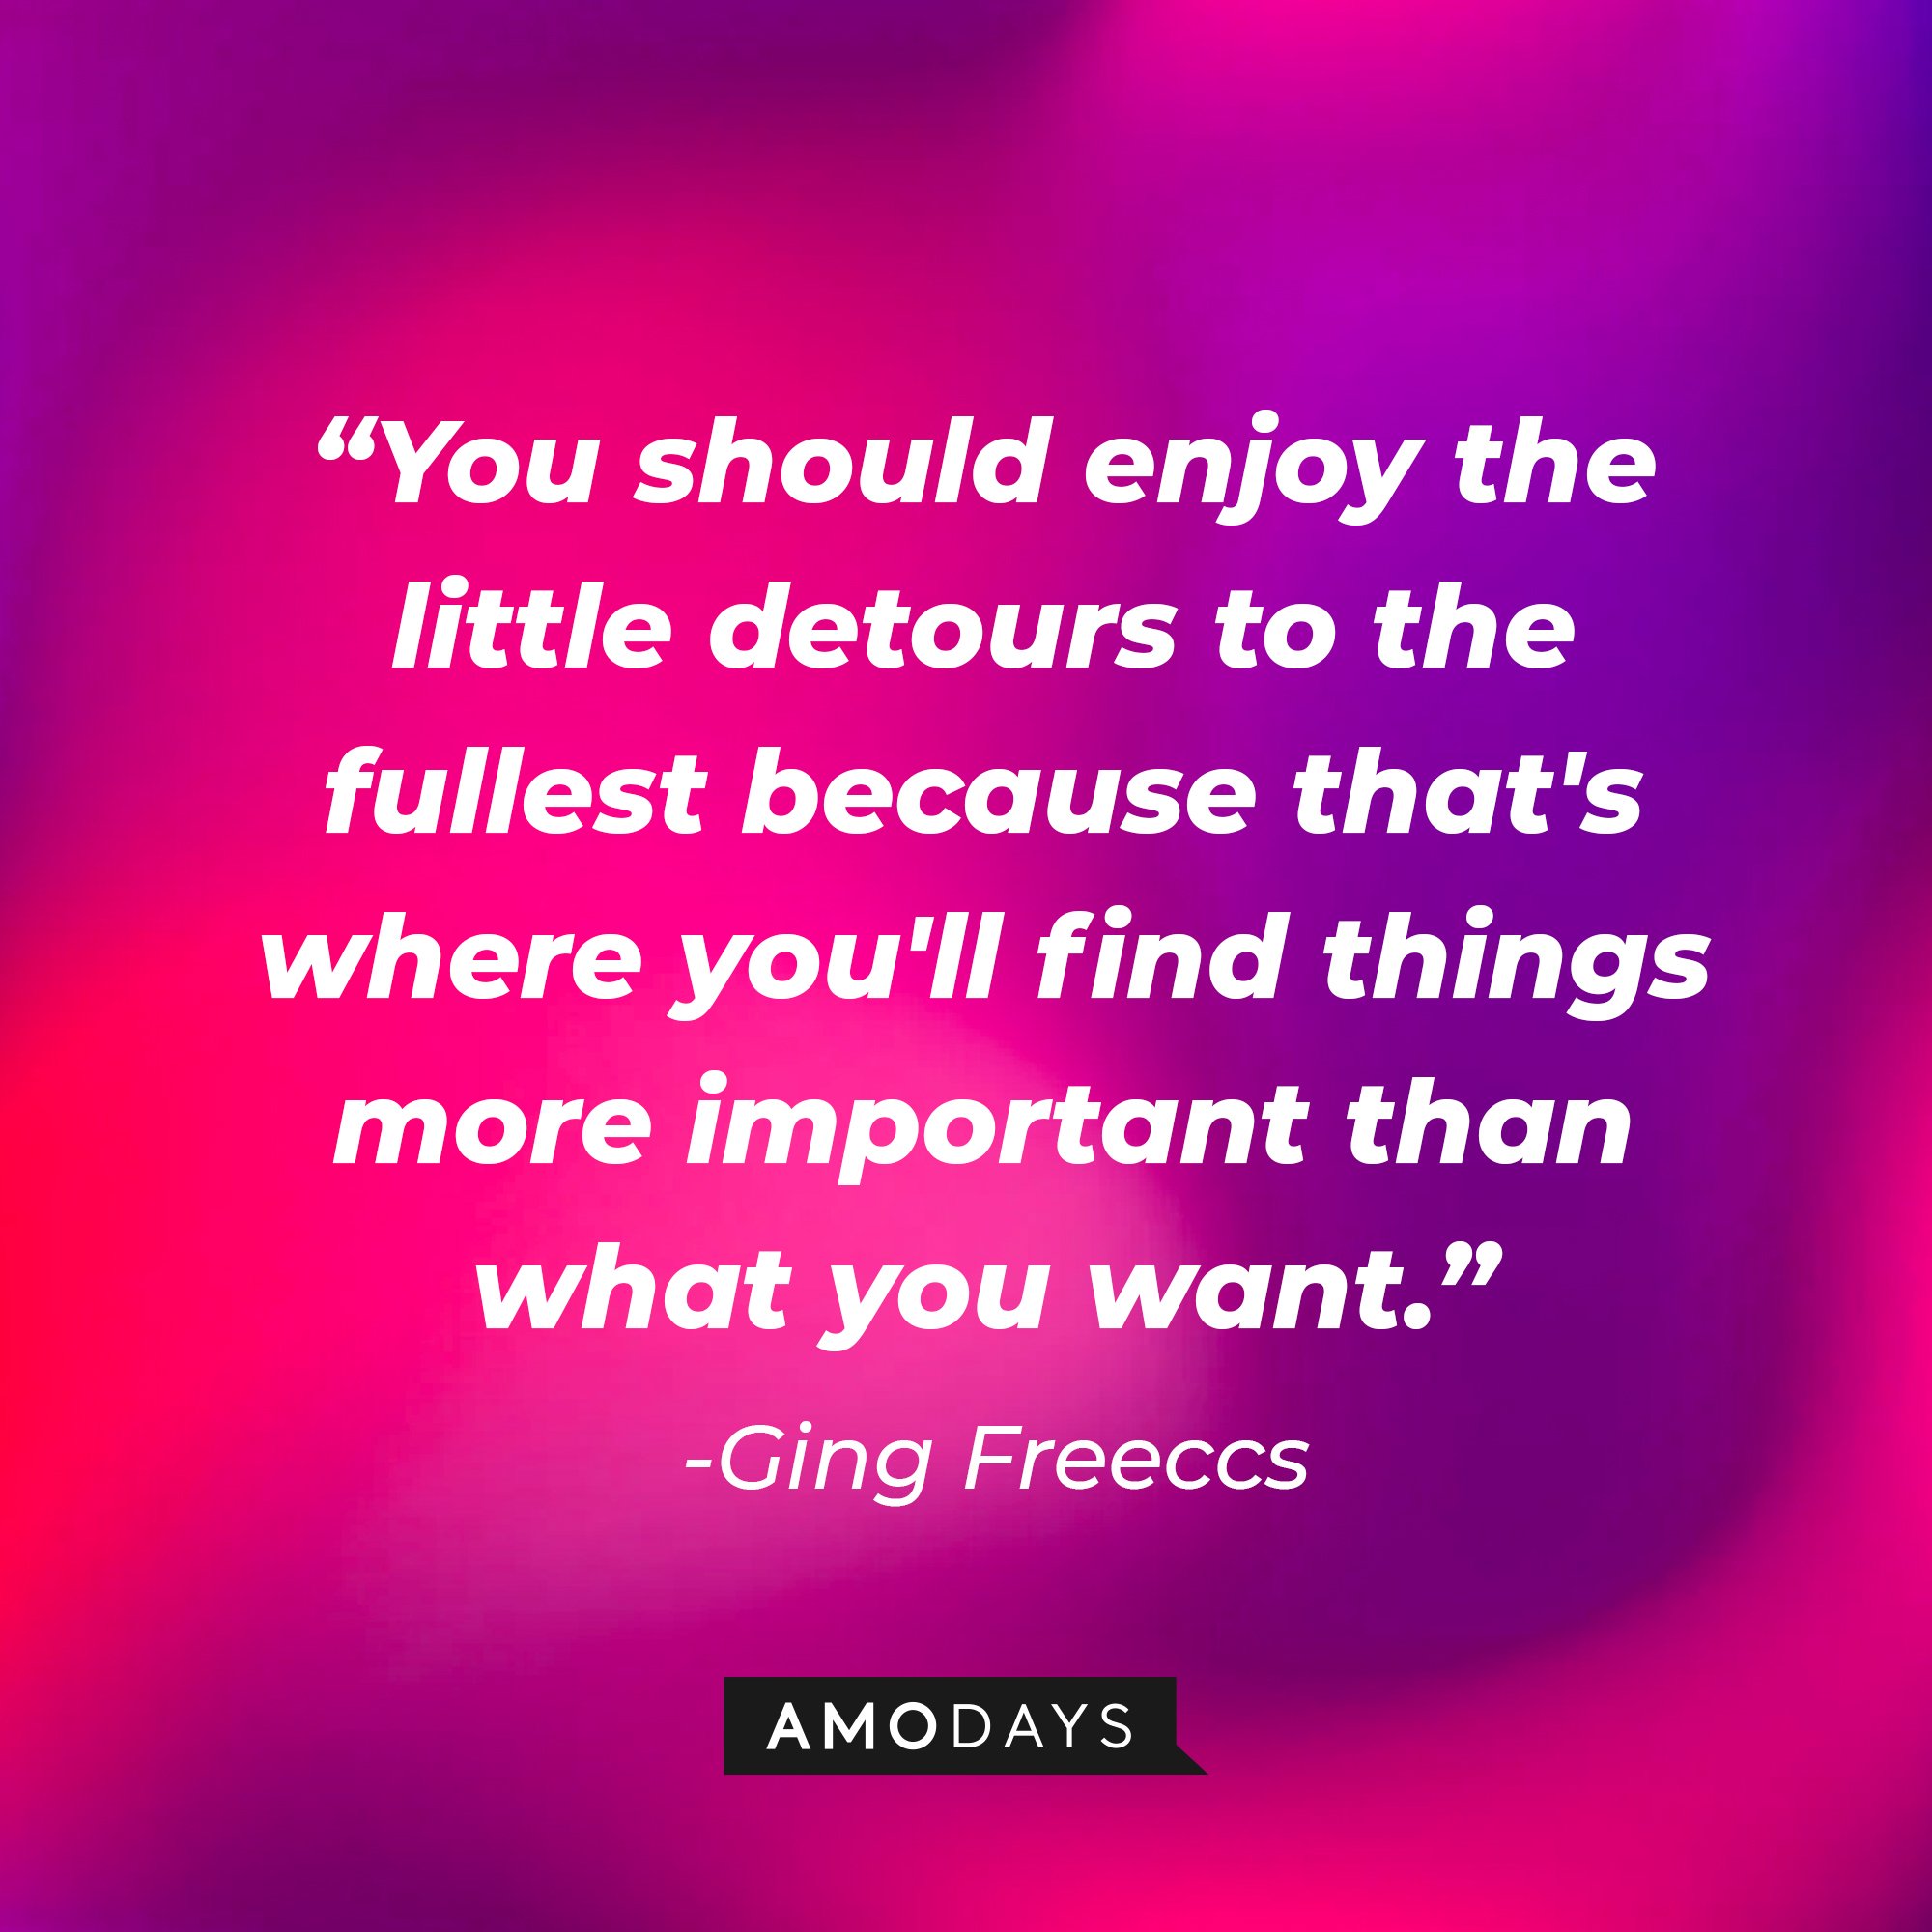 Ging Freeccs’ quote: "You should enjoy the little detours to the fullest because that's where you'll find things more important than what you want."  | Image: AmoDays